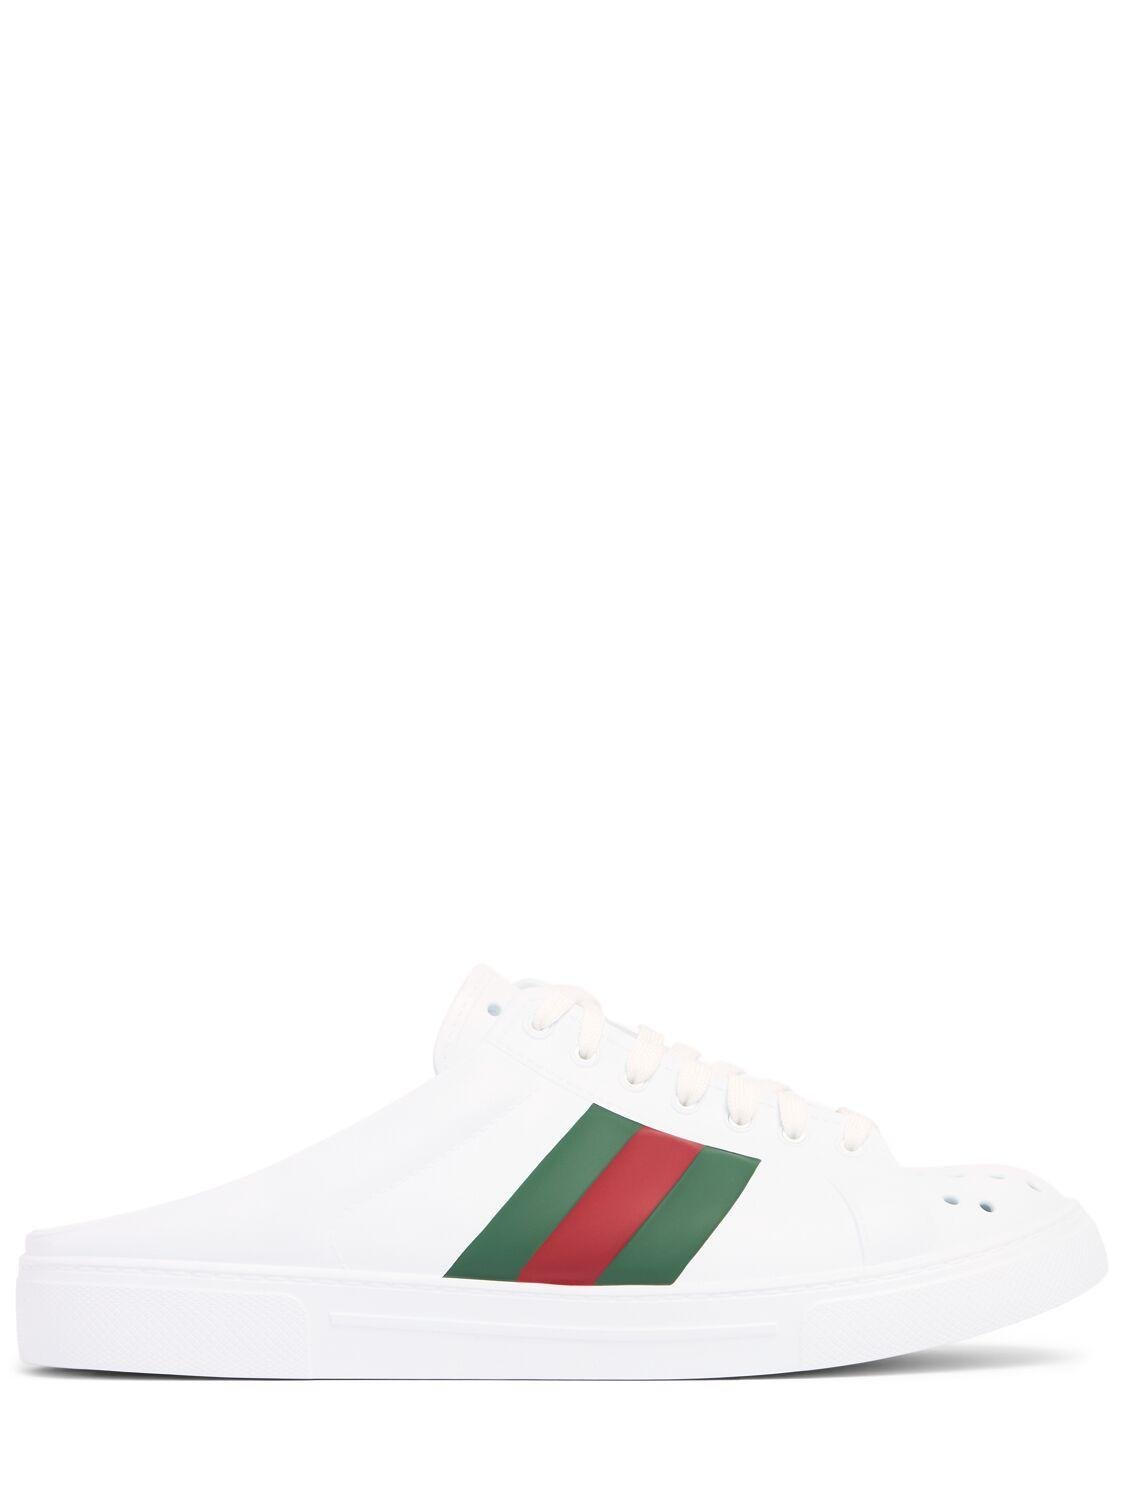 Ace Sabot Rubber Mules by GUCCI